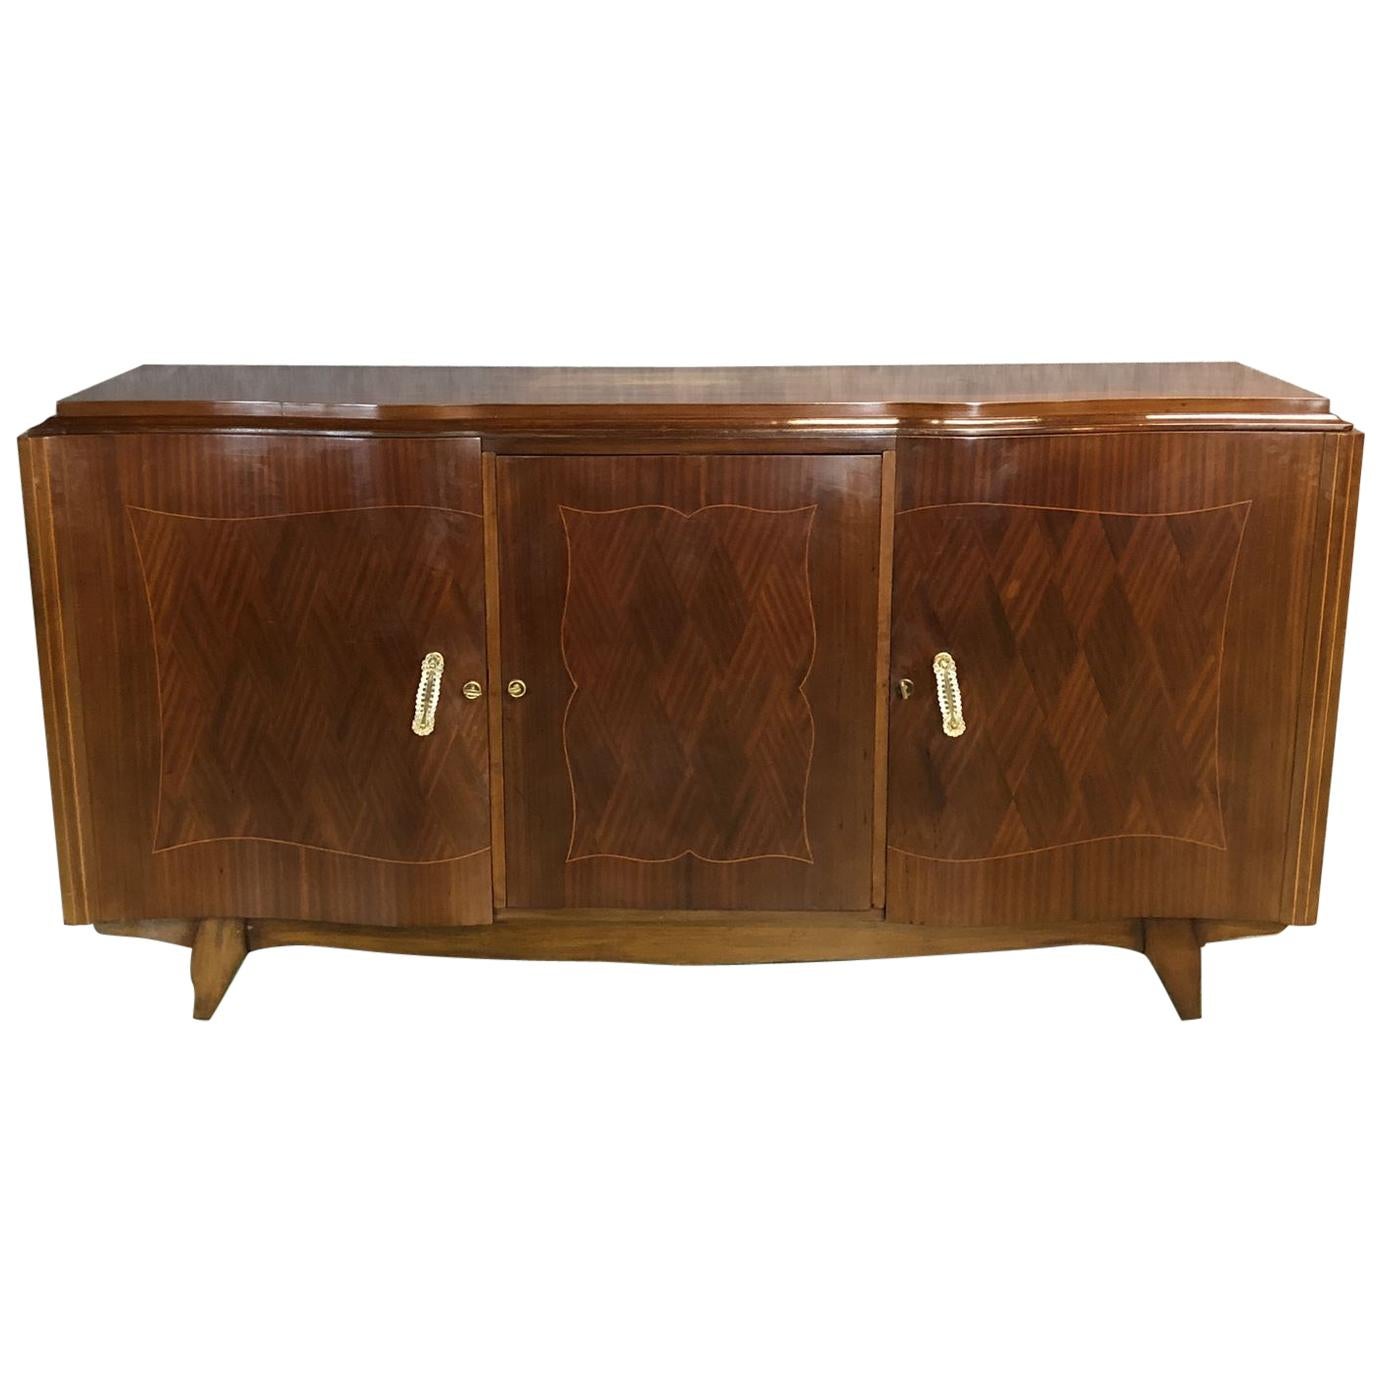 1930s Art Deco Mahogany Sideboard For Sale